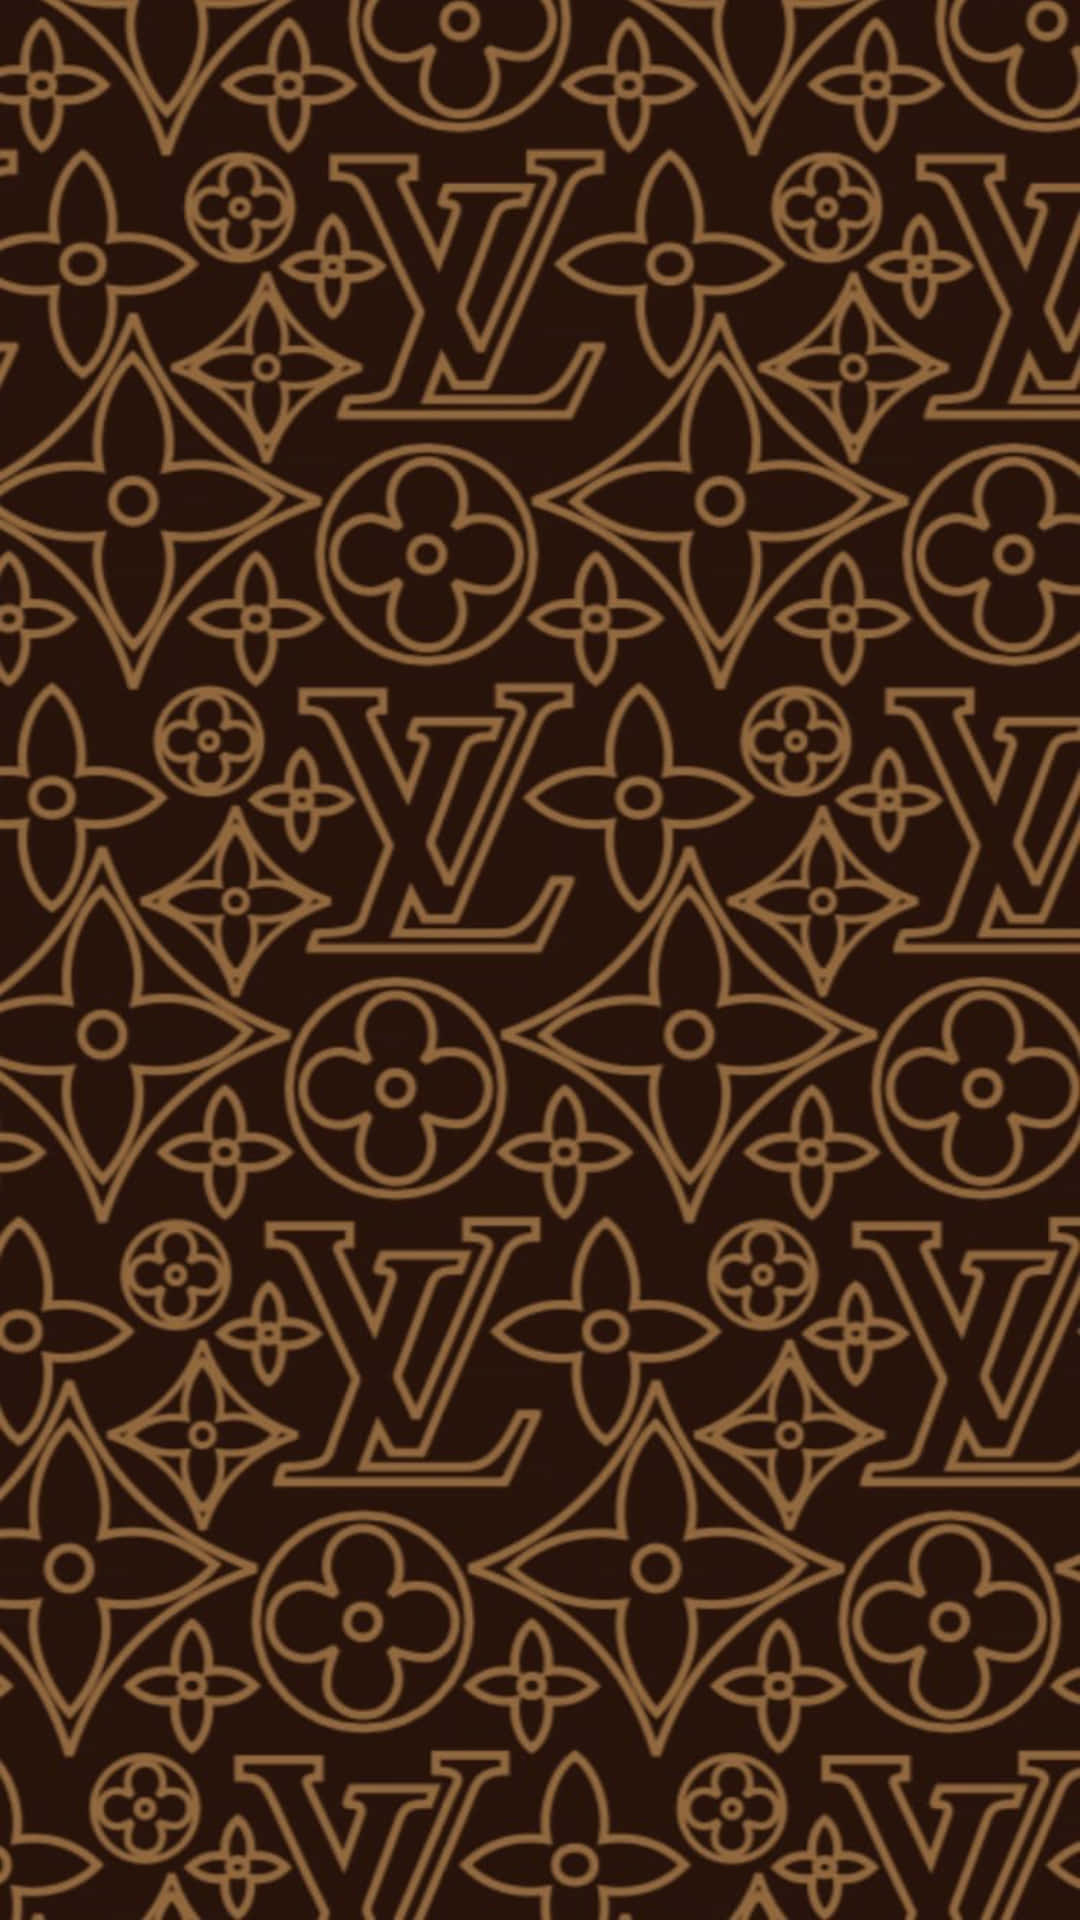 Louis Vuitton: An Iconic Design For Timeless Style Wallpaper